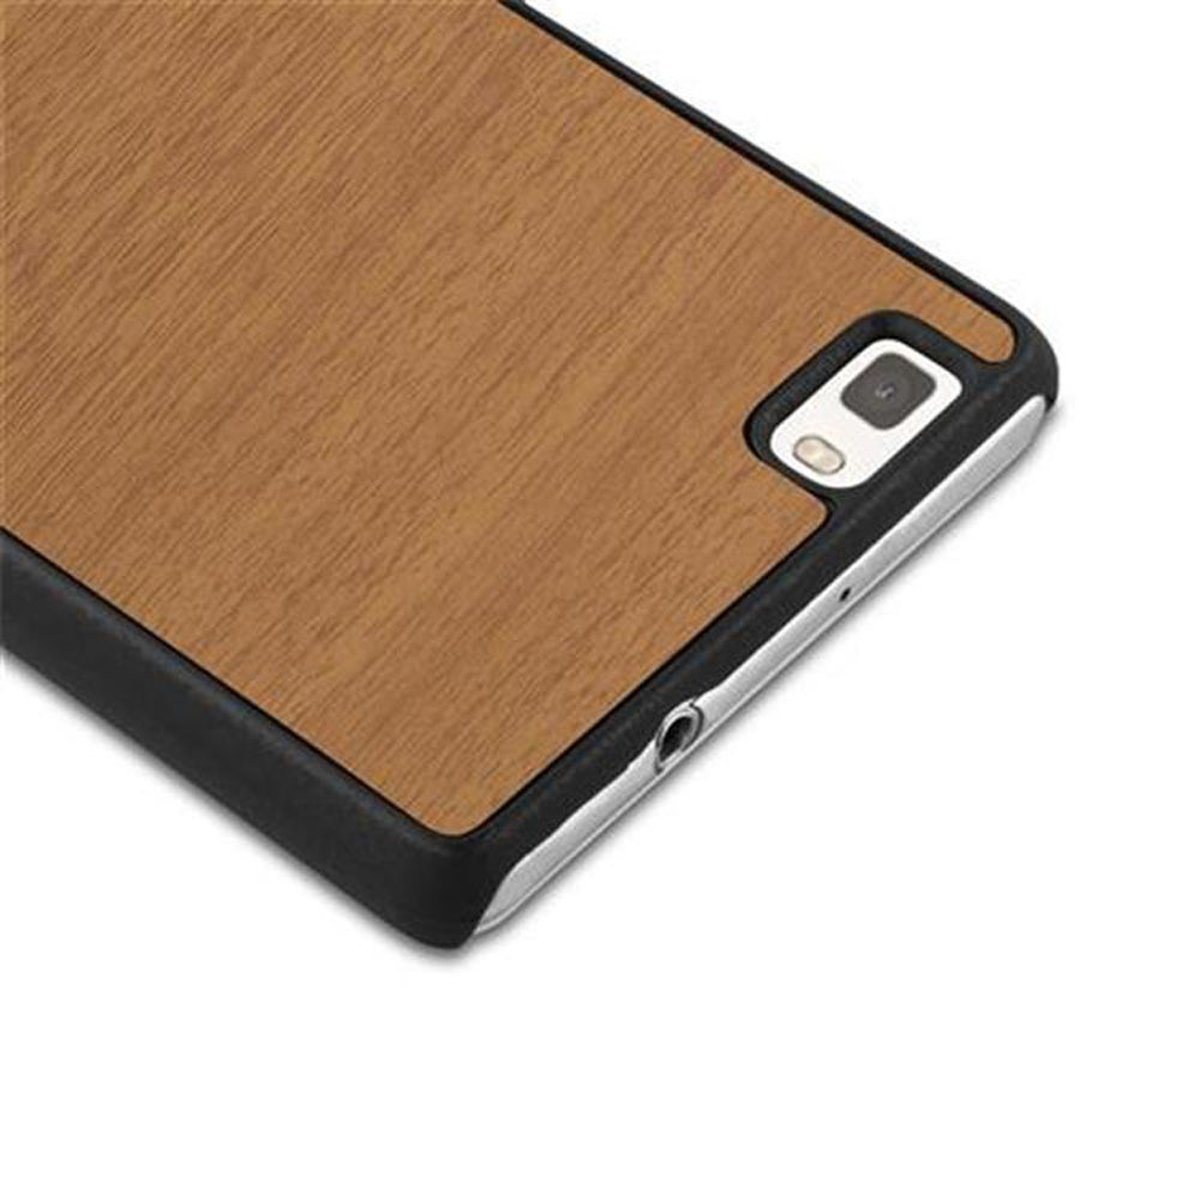 BRAUN P8 Huawei, Woody 2015, Backcover, Hülle LITE WOODY Hard Case CADORABO Style,